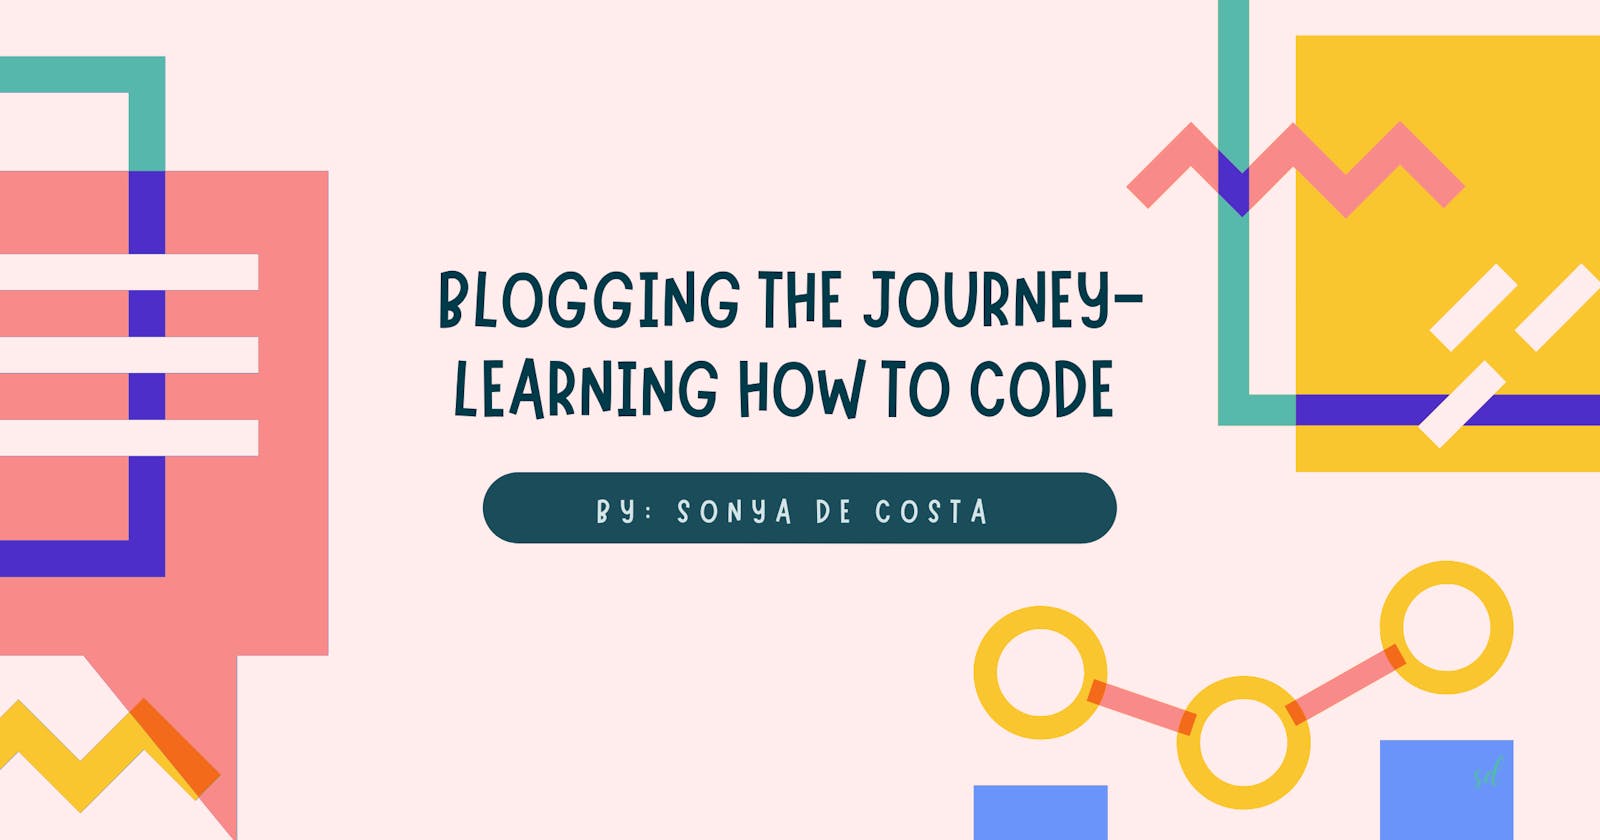 Blogging the Journey- Learning How To Code